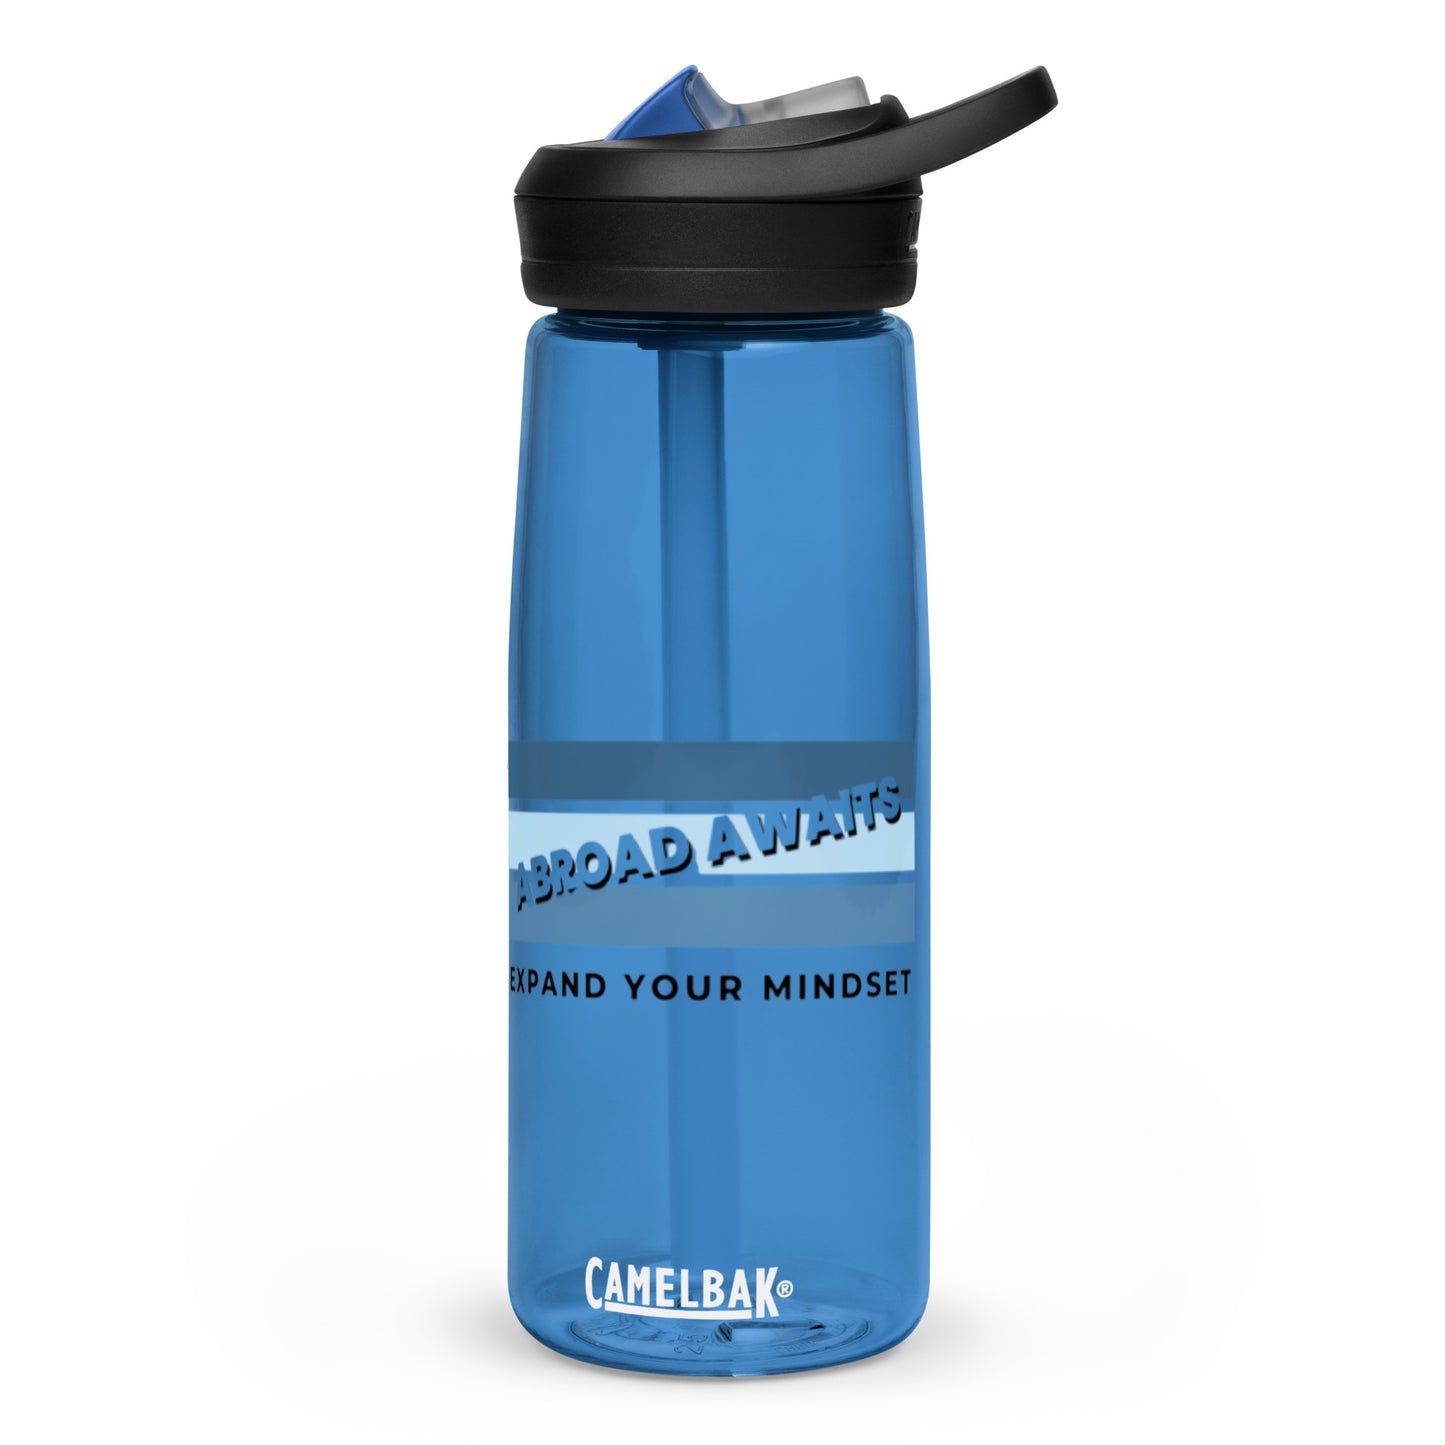 Sports water bottle Abroad Awaits Expand Your Mindest